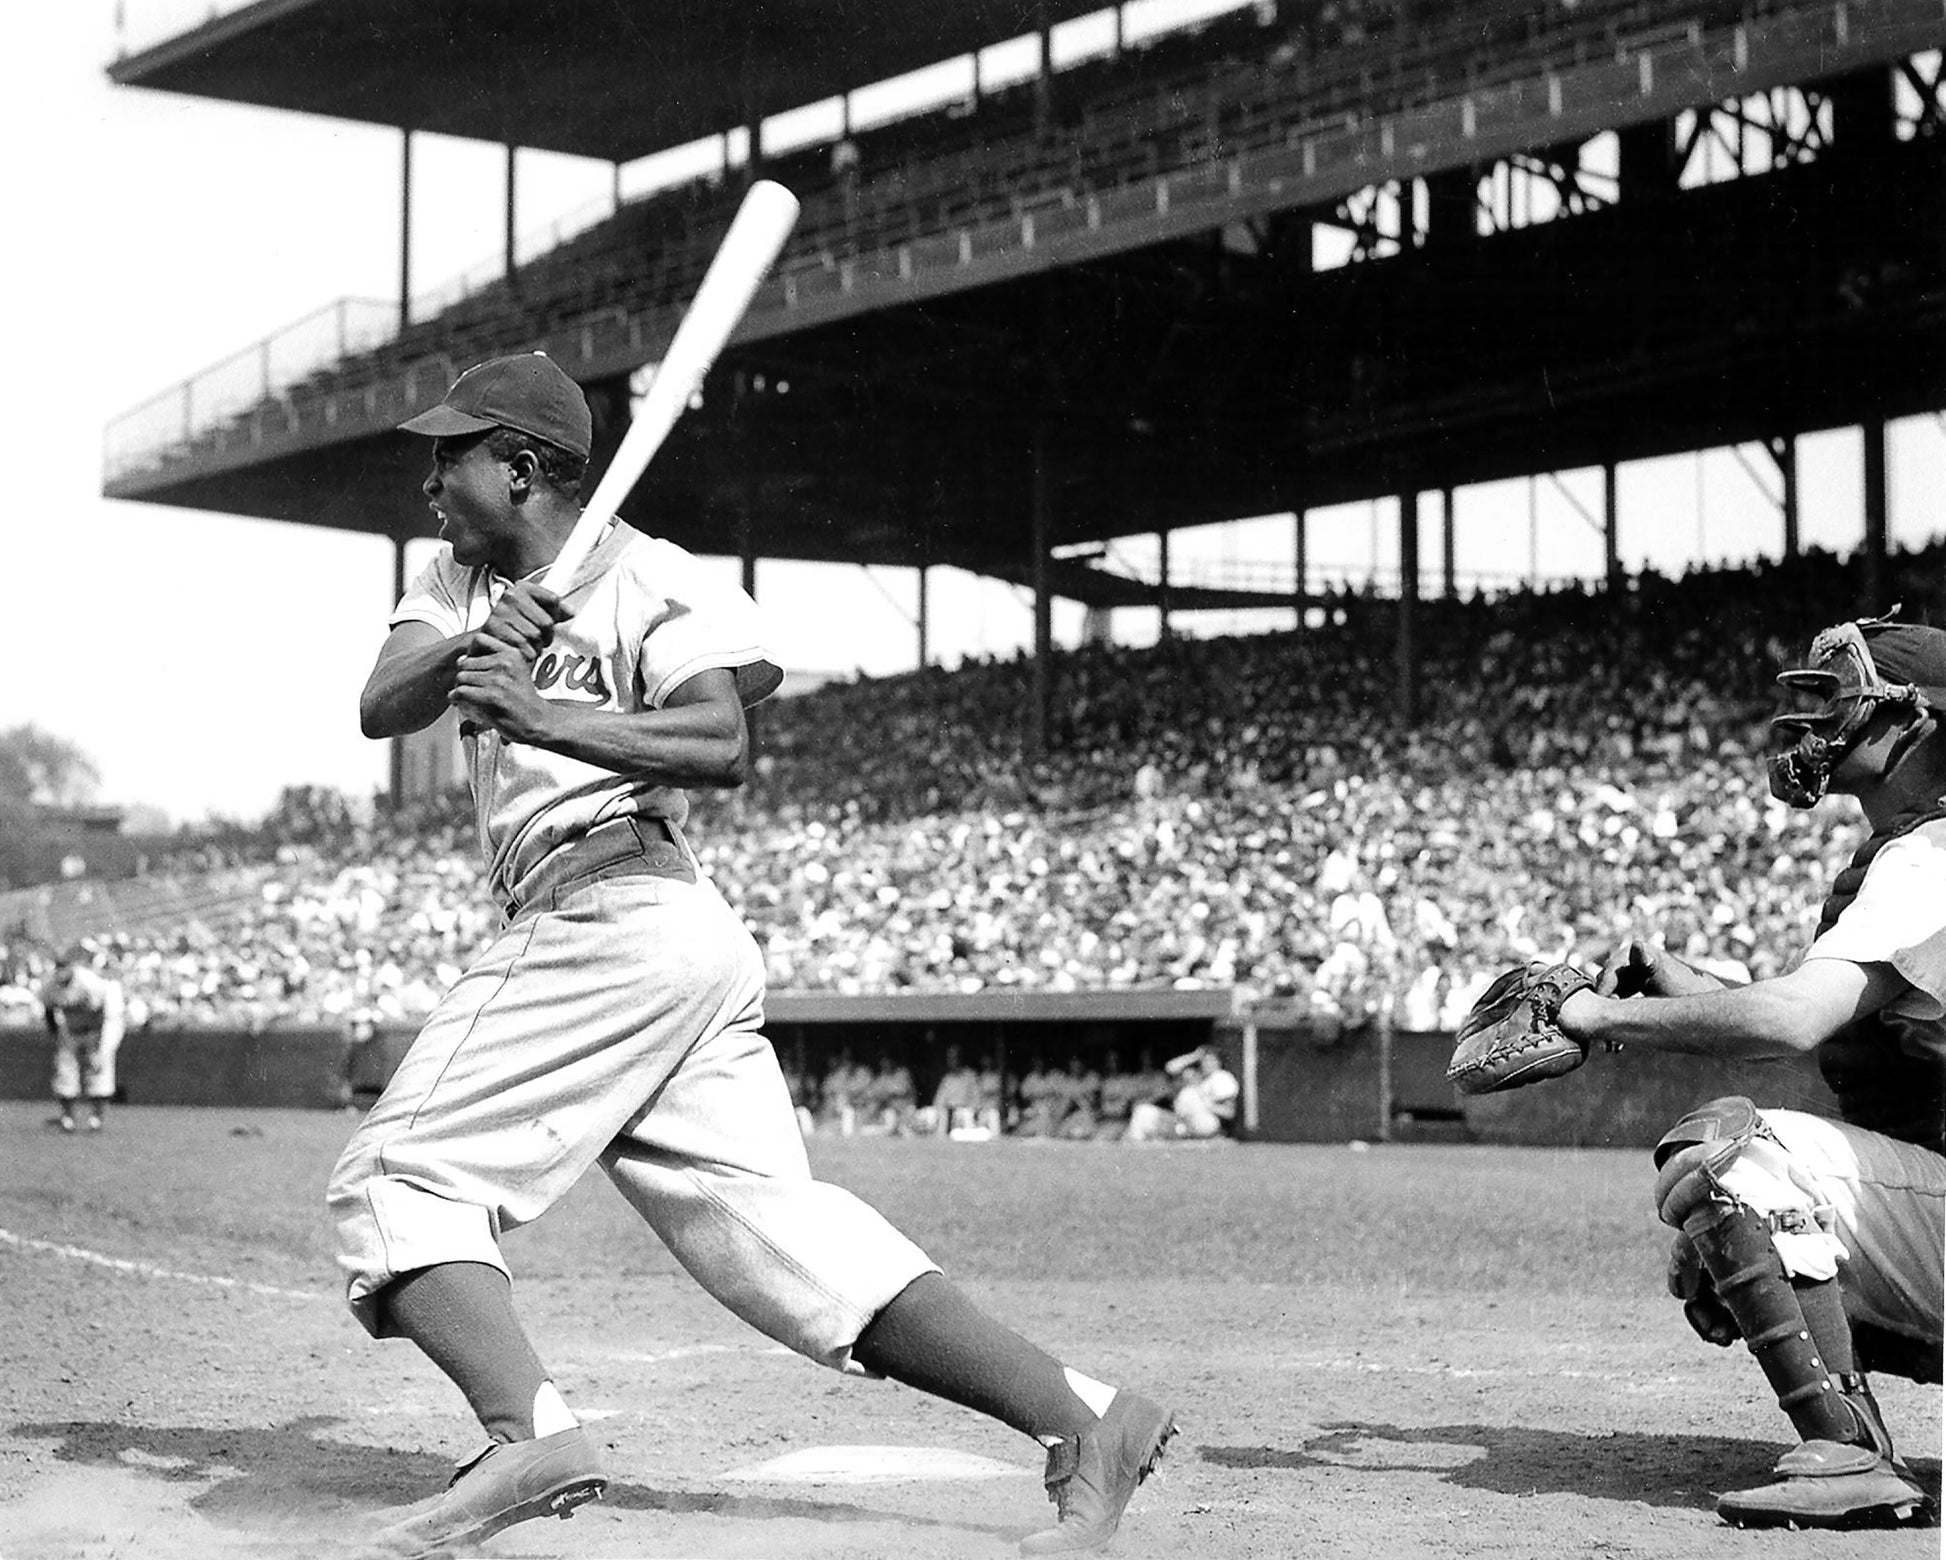 Brooklyn Dodgers Jackie Robinson at The Plate In 1948 8x10 Photograph